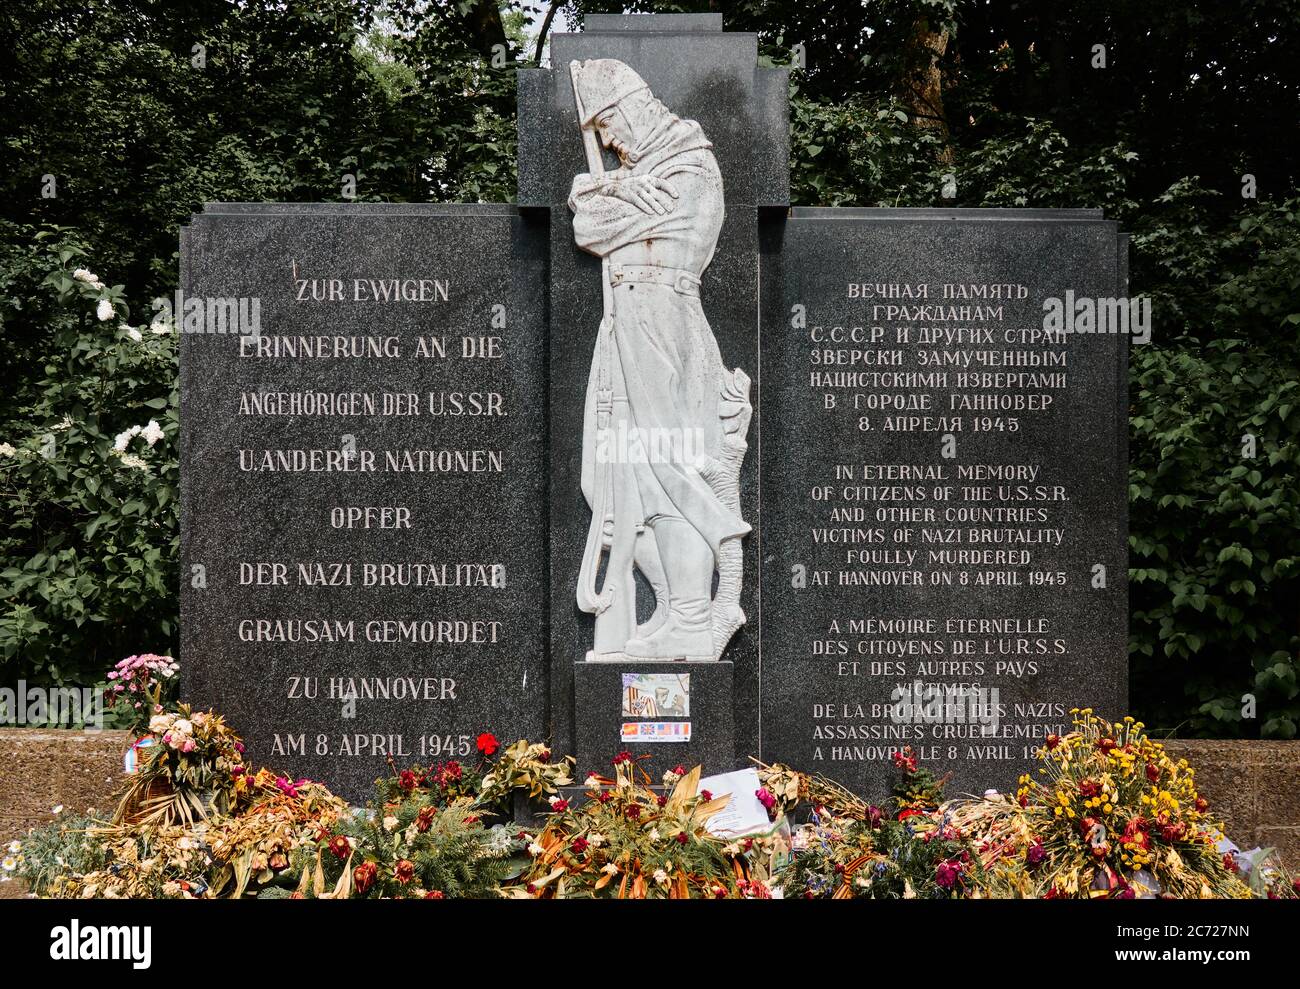 Hanover Germany, 23 May 2020: Memorial behind the graves of forced laborers who were killed shortly before the end of WWII Stock Photo